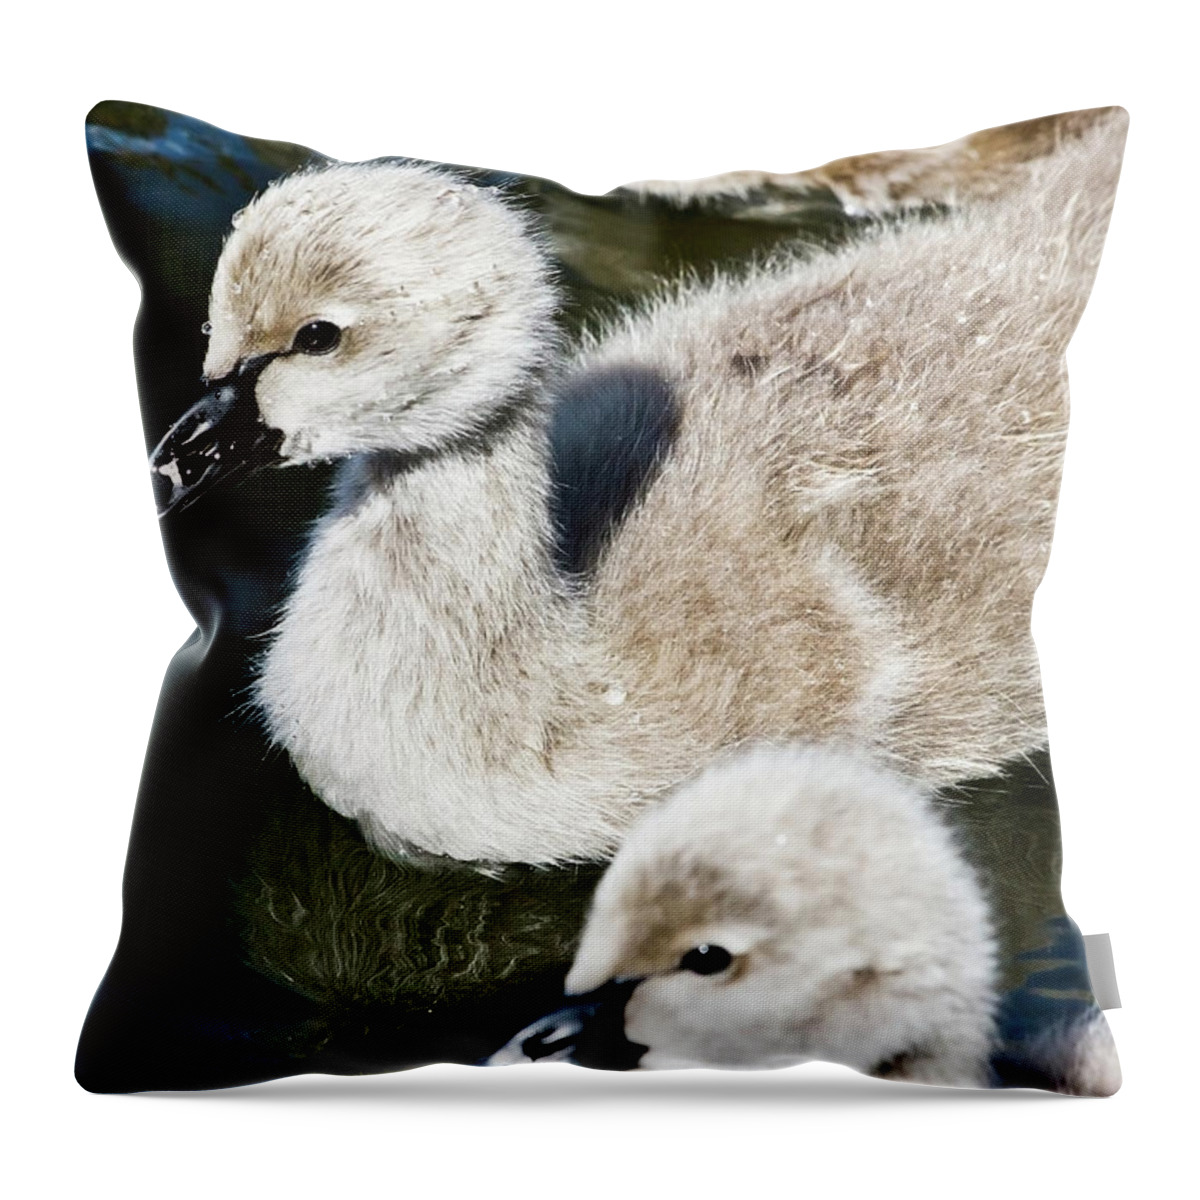 Cygnet Throw Pillow featuring the photograph Water Droplets Falling Down by Miroslava Jurcik